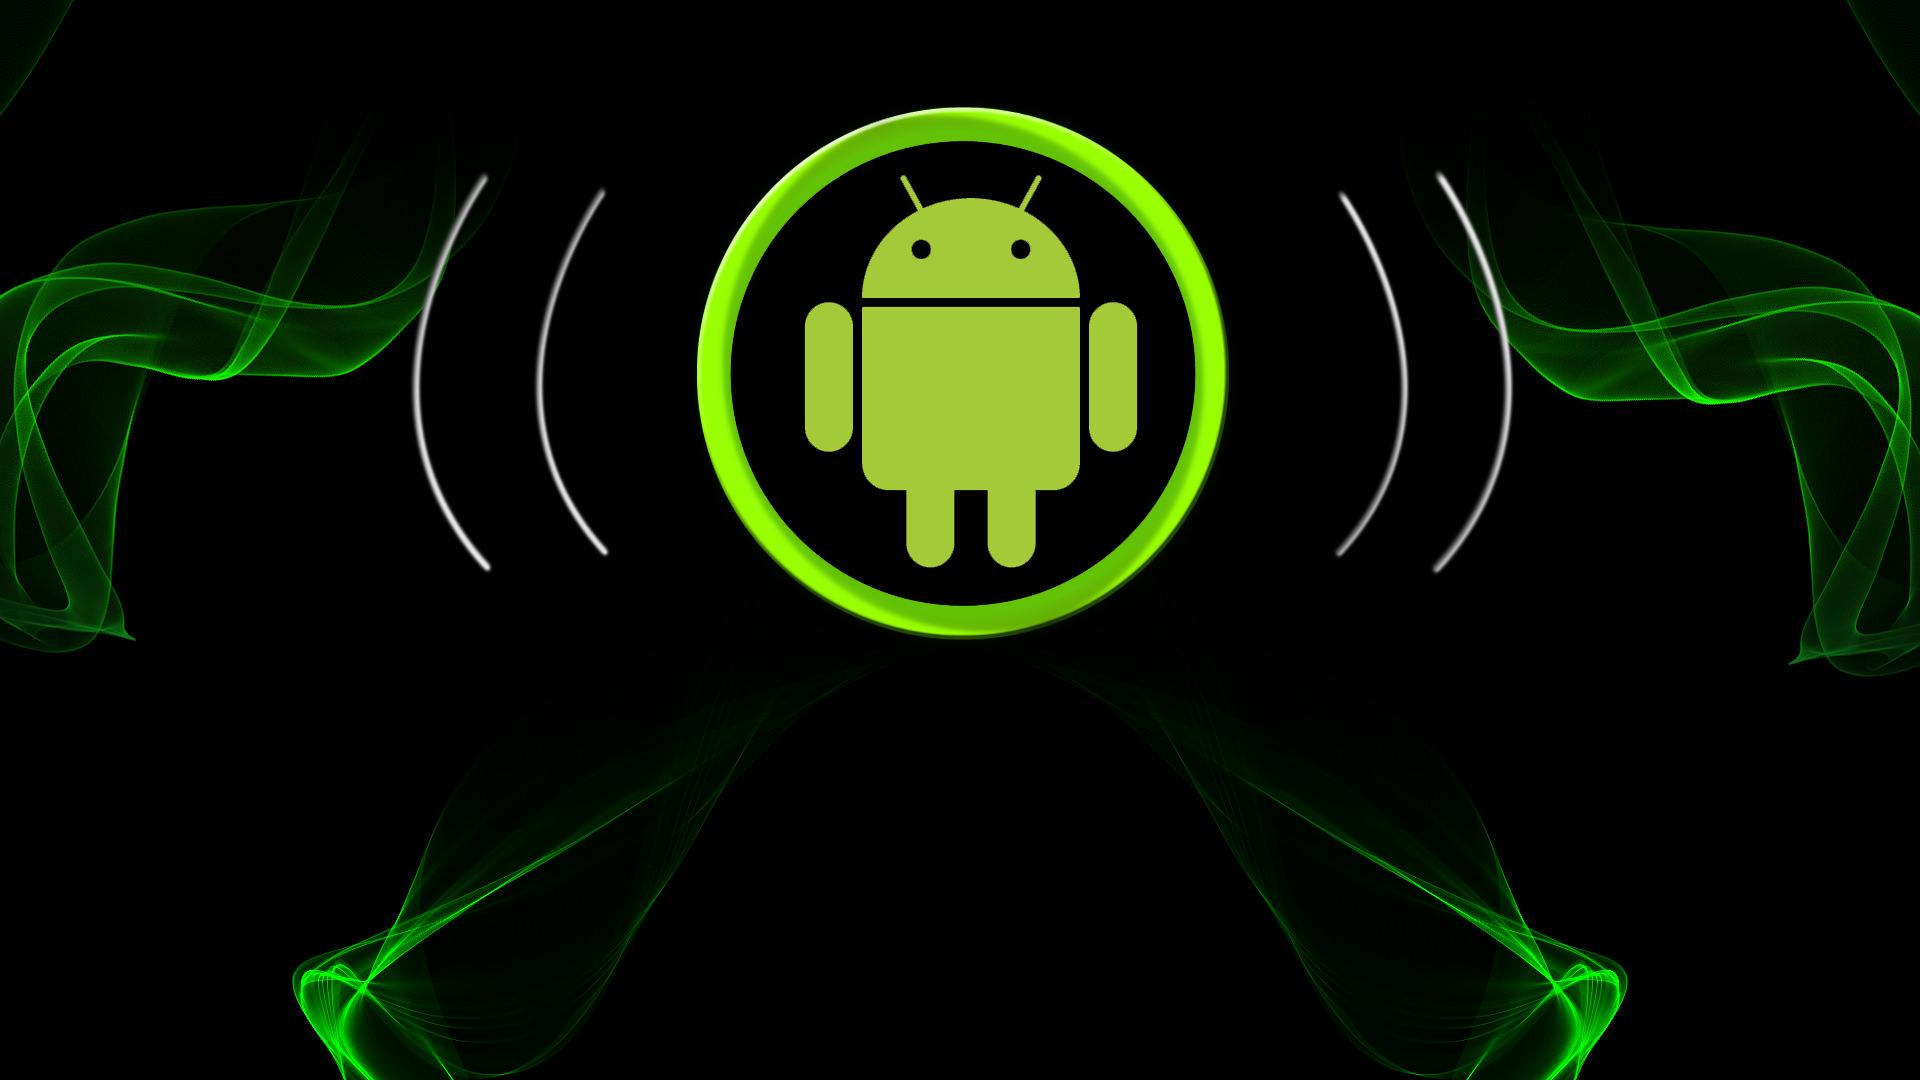 Android logo black and white | wallpaper.sc SmartPhone